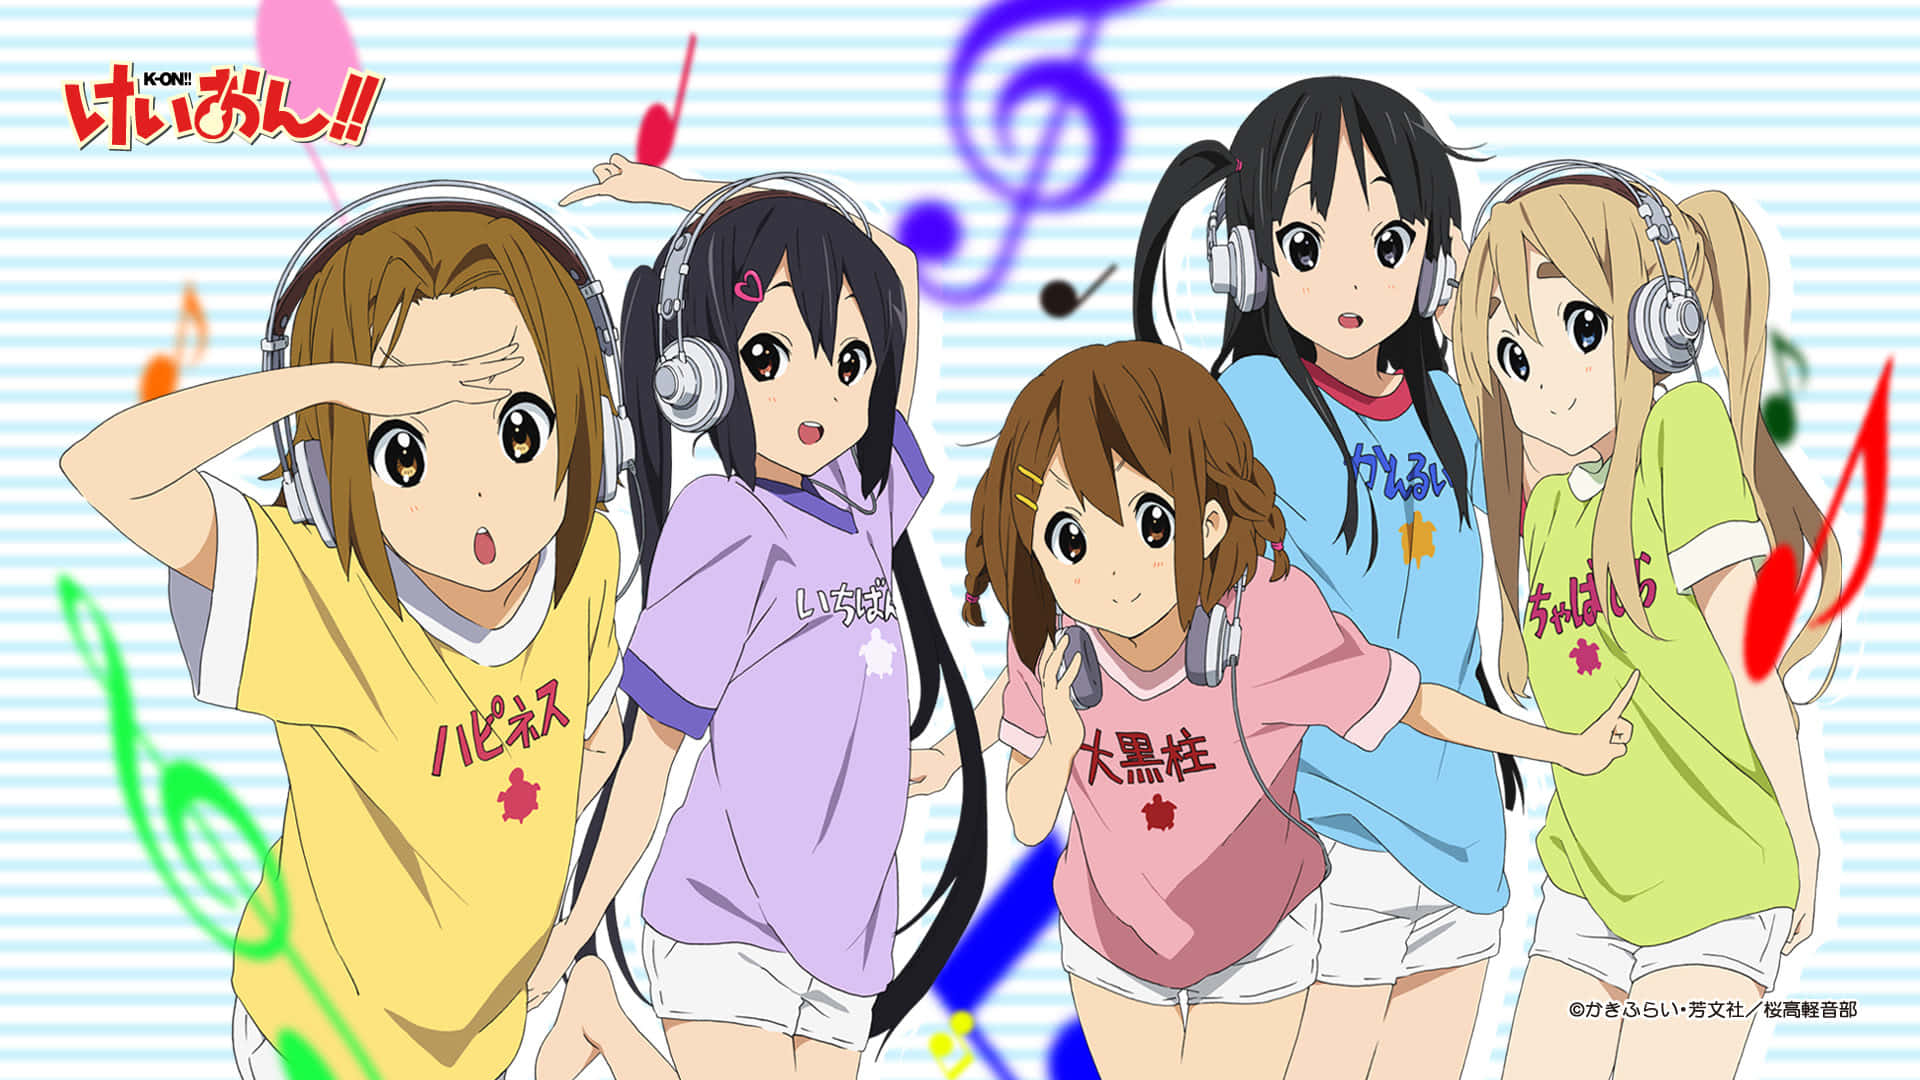 A Group Of Anime Girls In A Group Of Music Notes